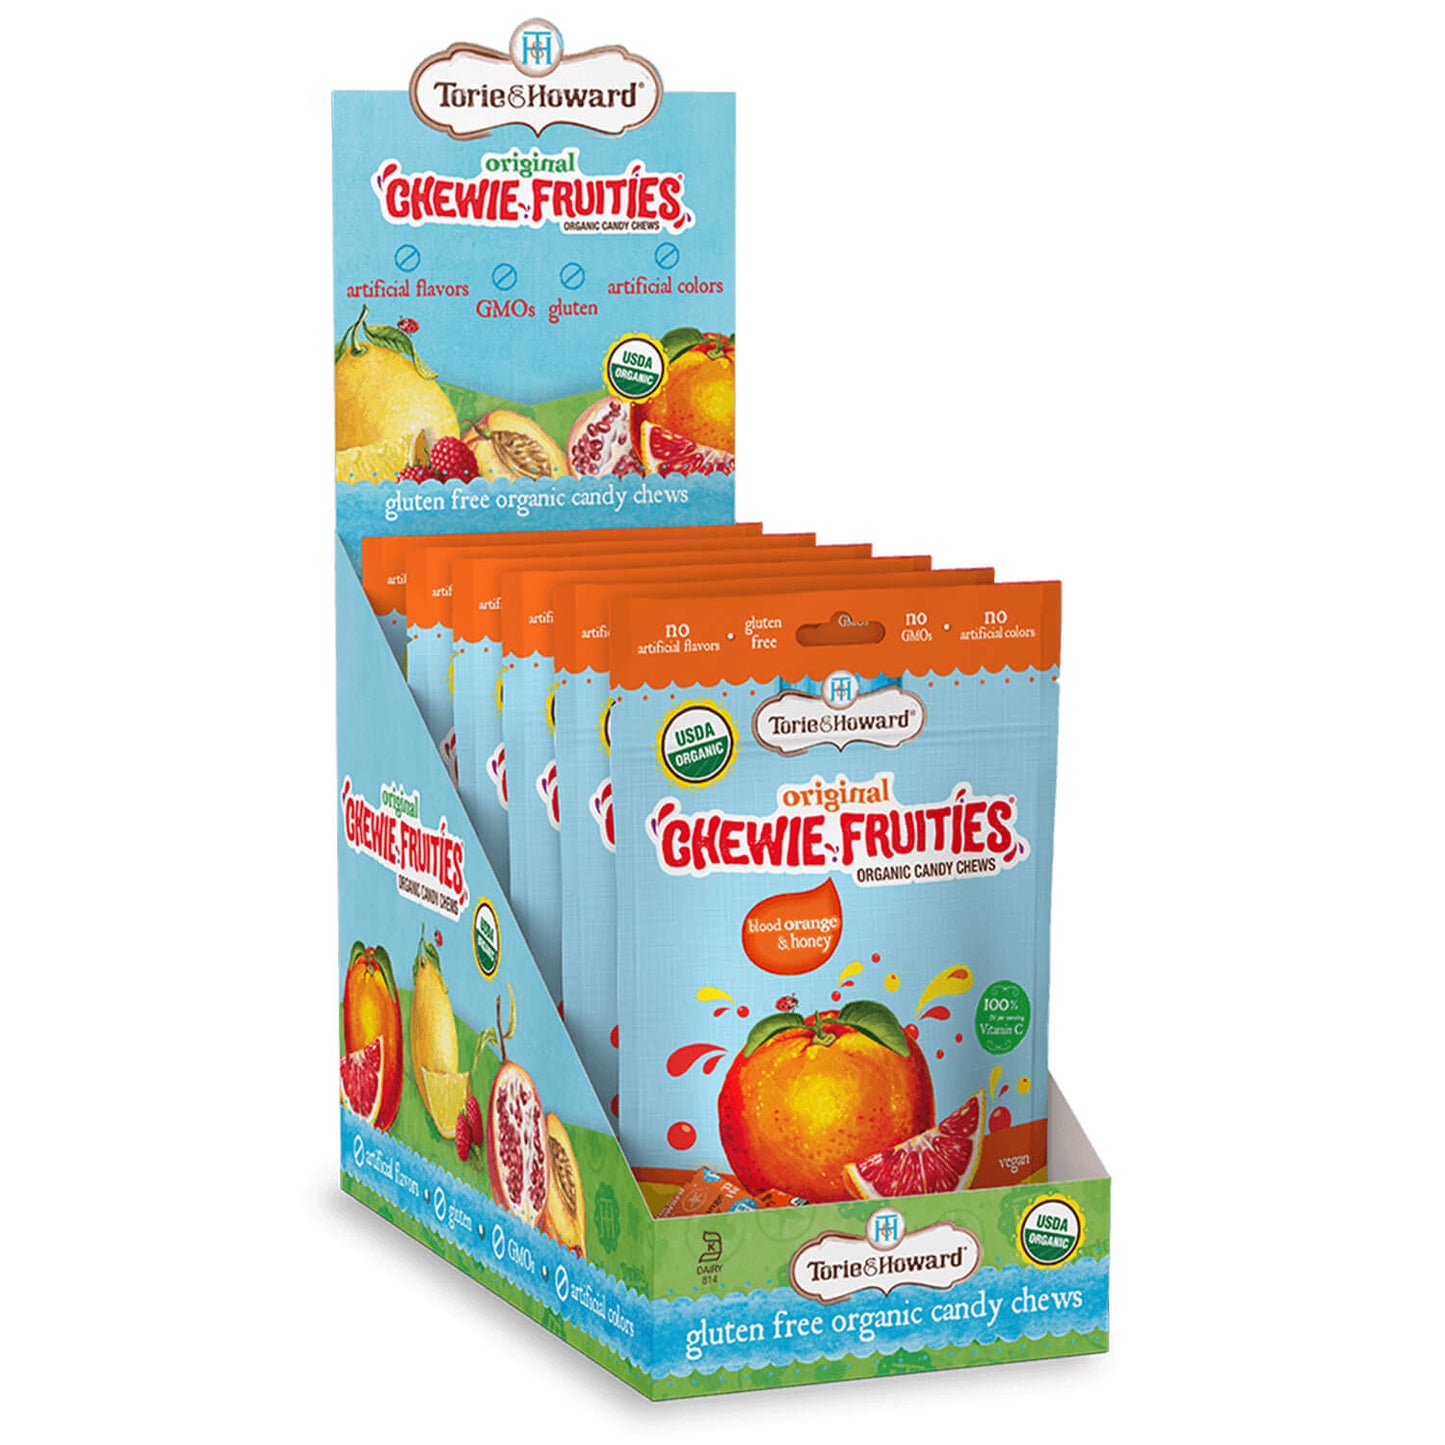 6 count caddy of Torie & Howard Chewie Fruities Blood Orange & Honey Candy 4oz Bags